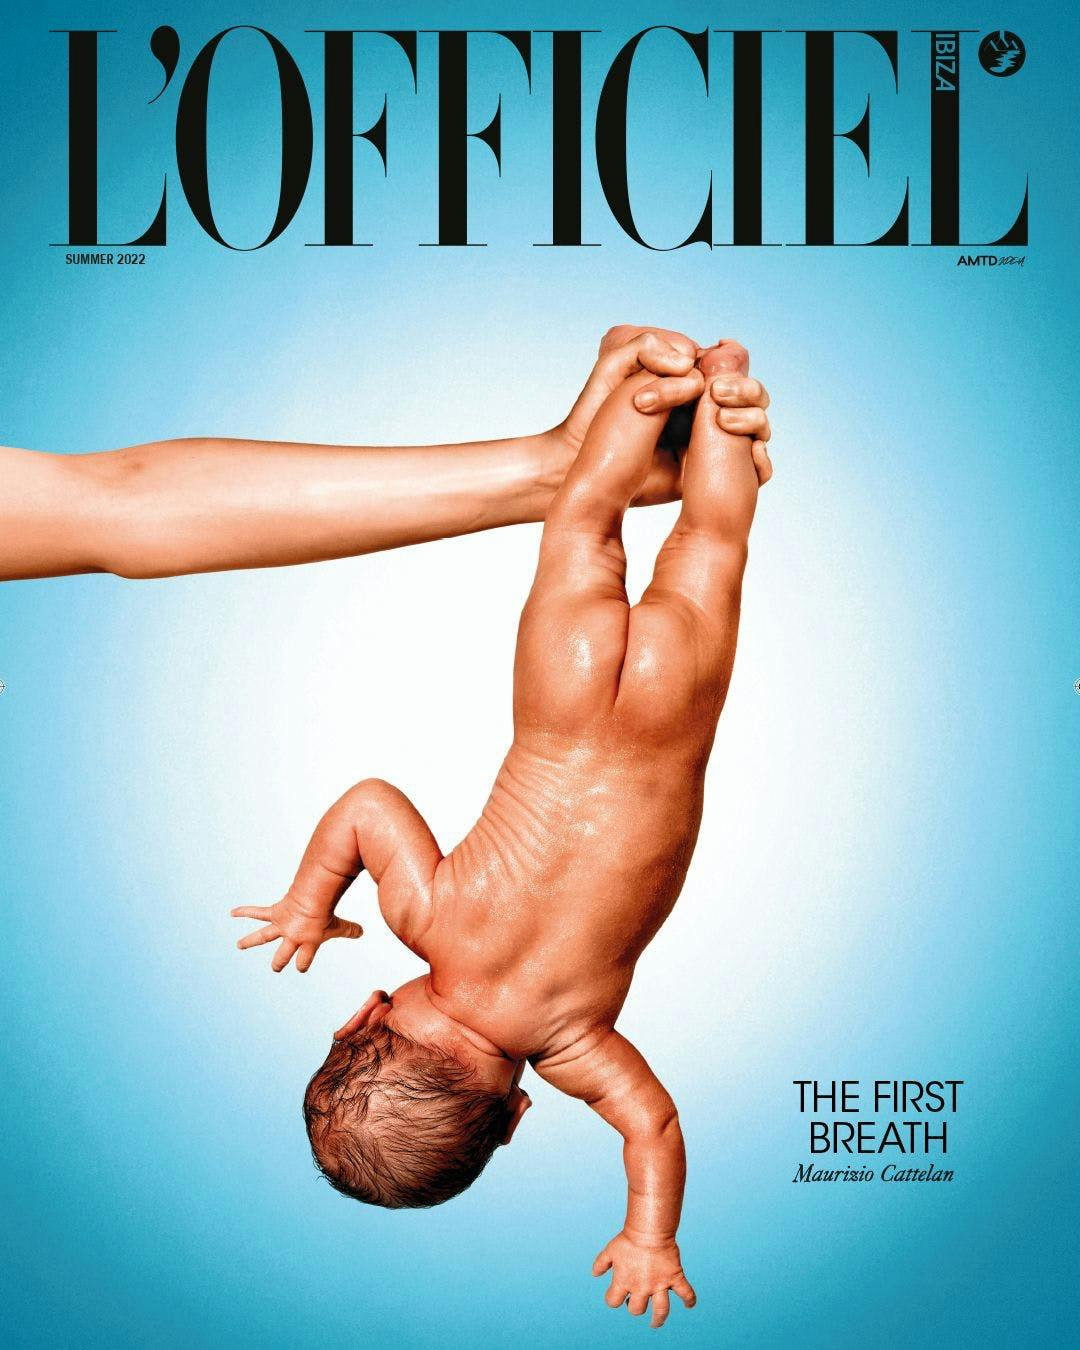 L'Officiel Ibiza - The First Breath by Maurizio Cattelan